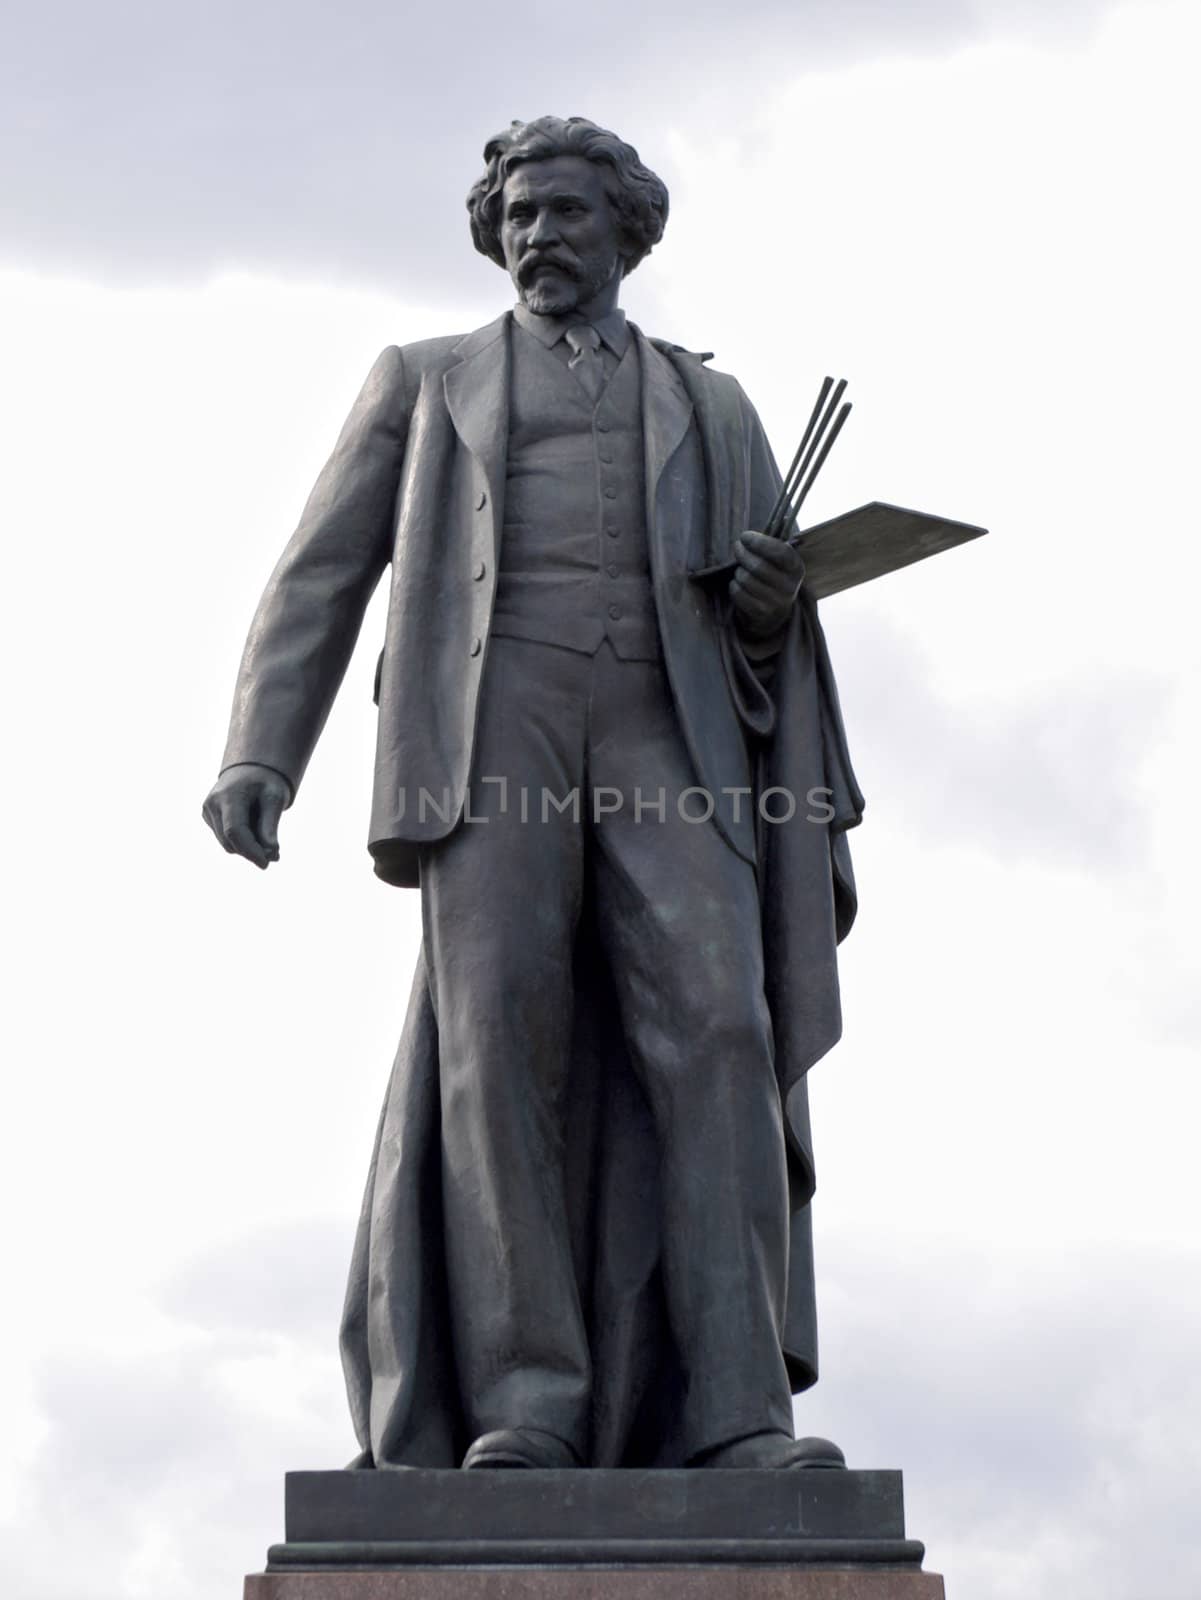 Monument of Artist Repin in Bolotnaya square, Moscow, Russia by Stoyanov